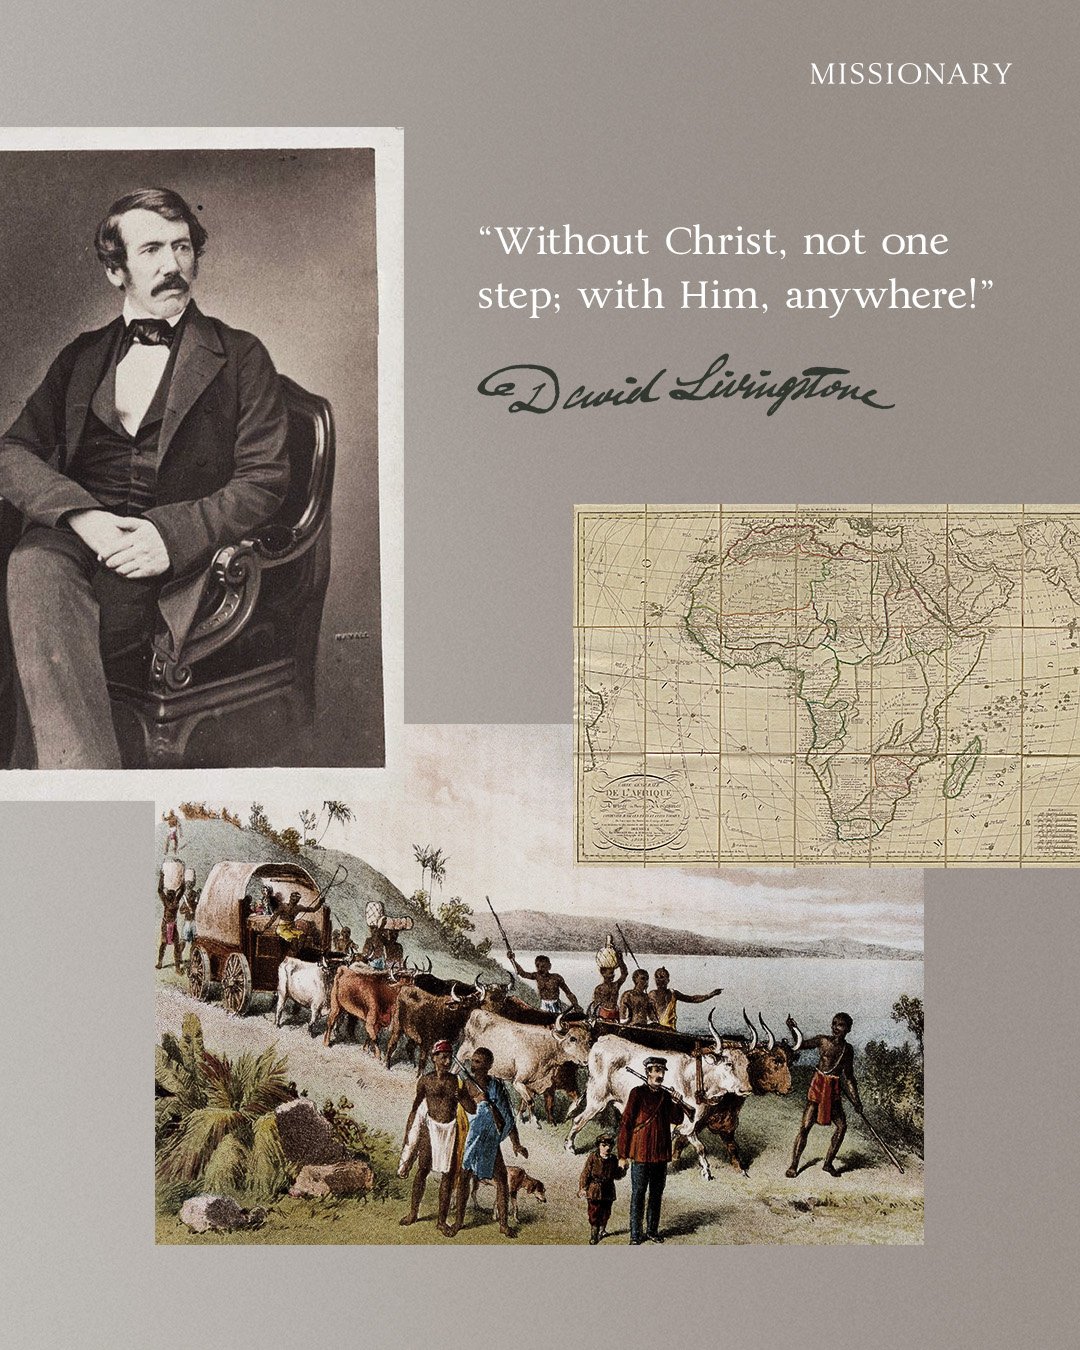 &ldquo;Without Christ, not one step; with Him, anywhere!&rdquo; &mdash; David Livingstone

In 1840, Livingstone set sail from London to Africa. He spent his life there preaching the gospel, exploring Africa, and fighting against slavery.